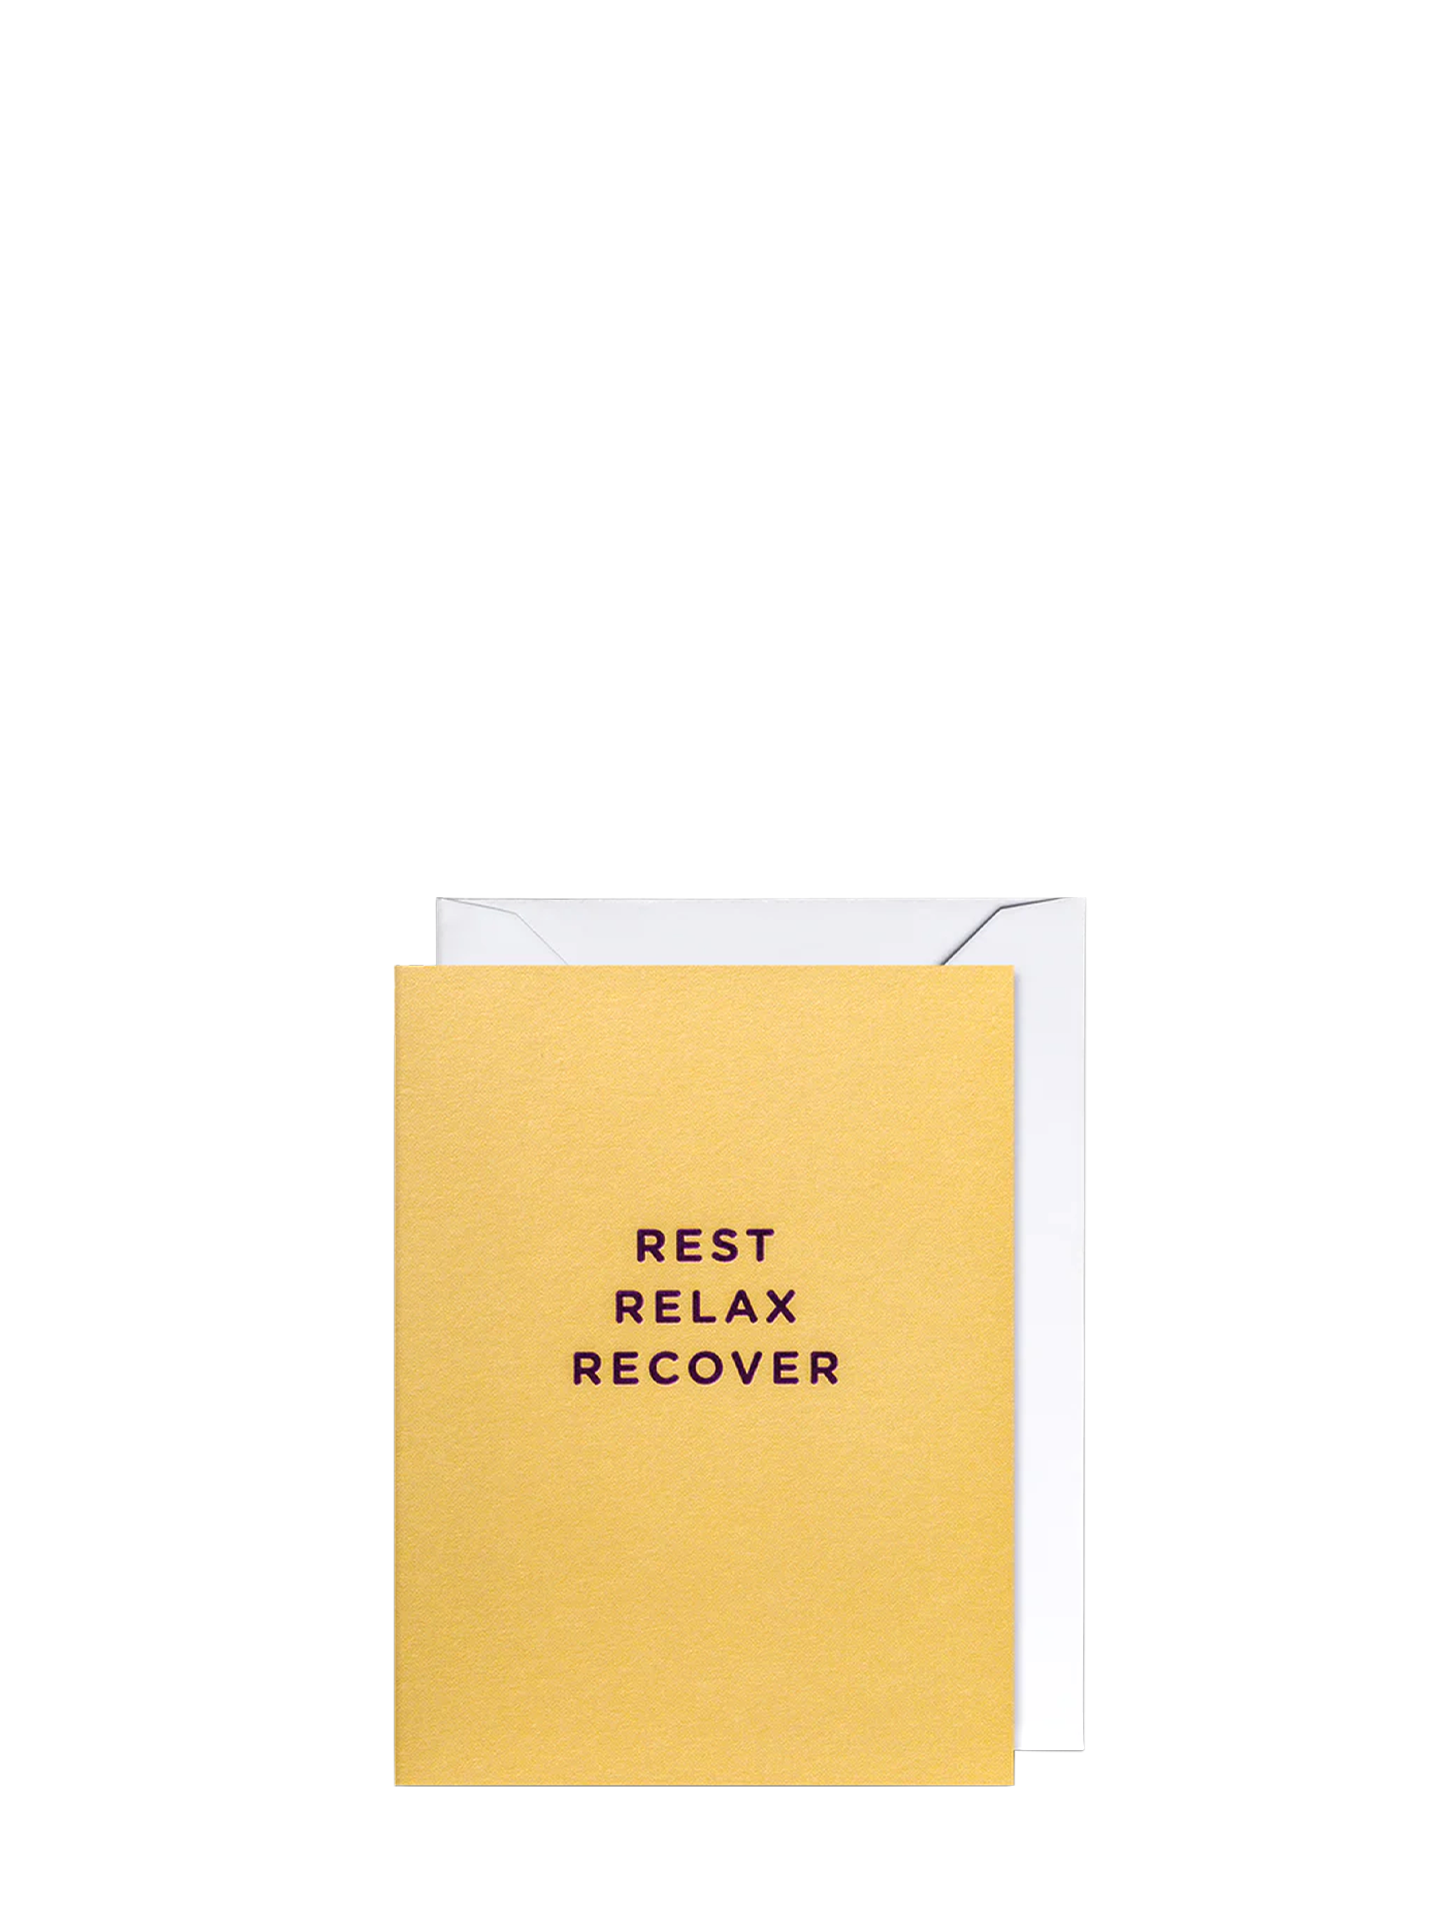 Relax Rest Recover Mini Card